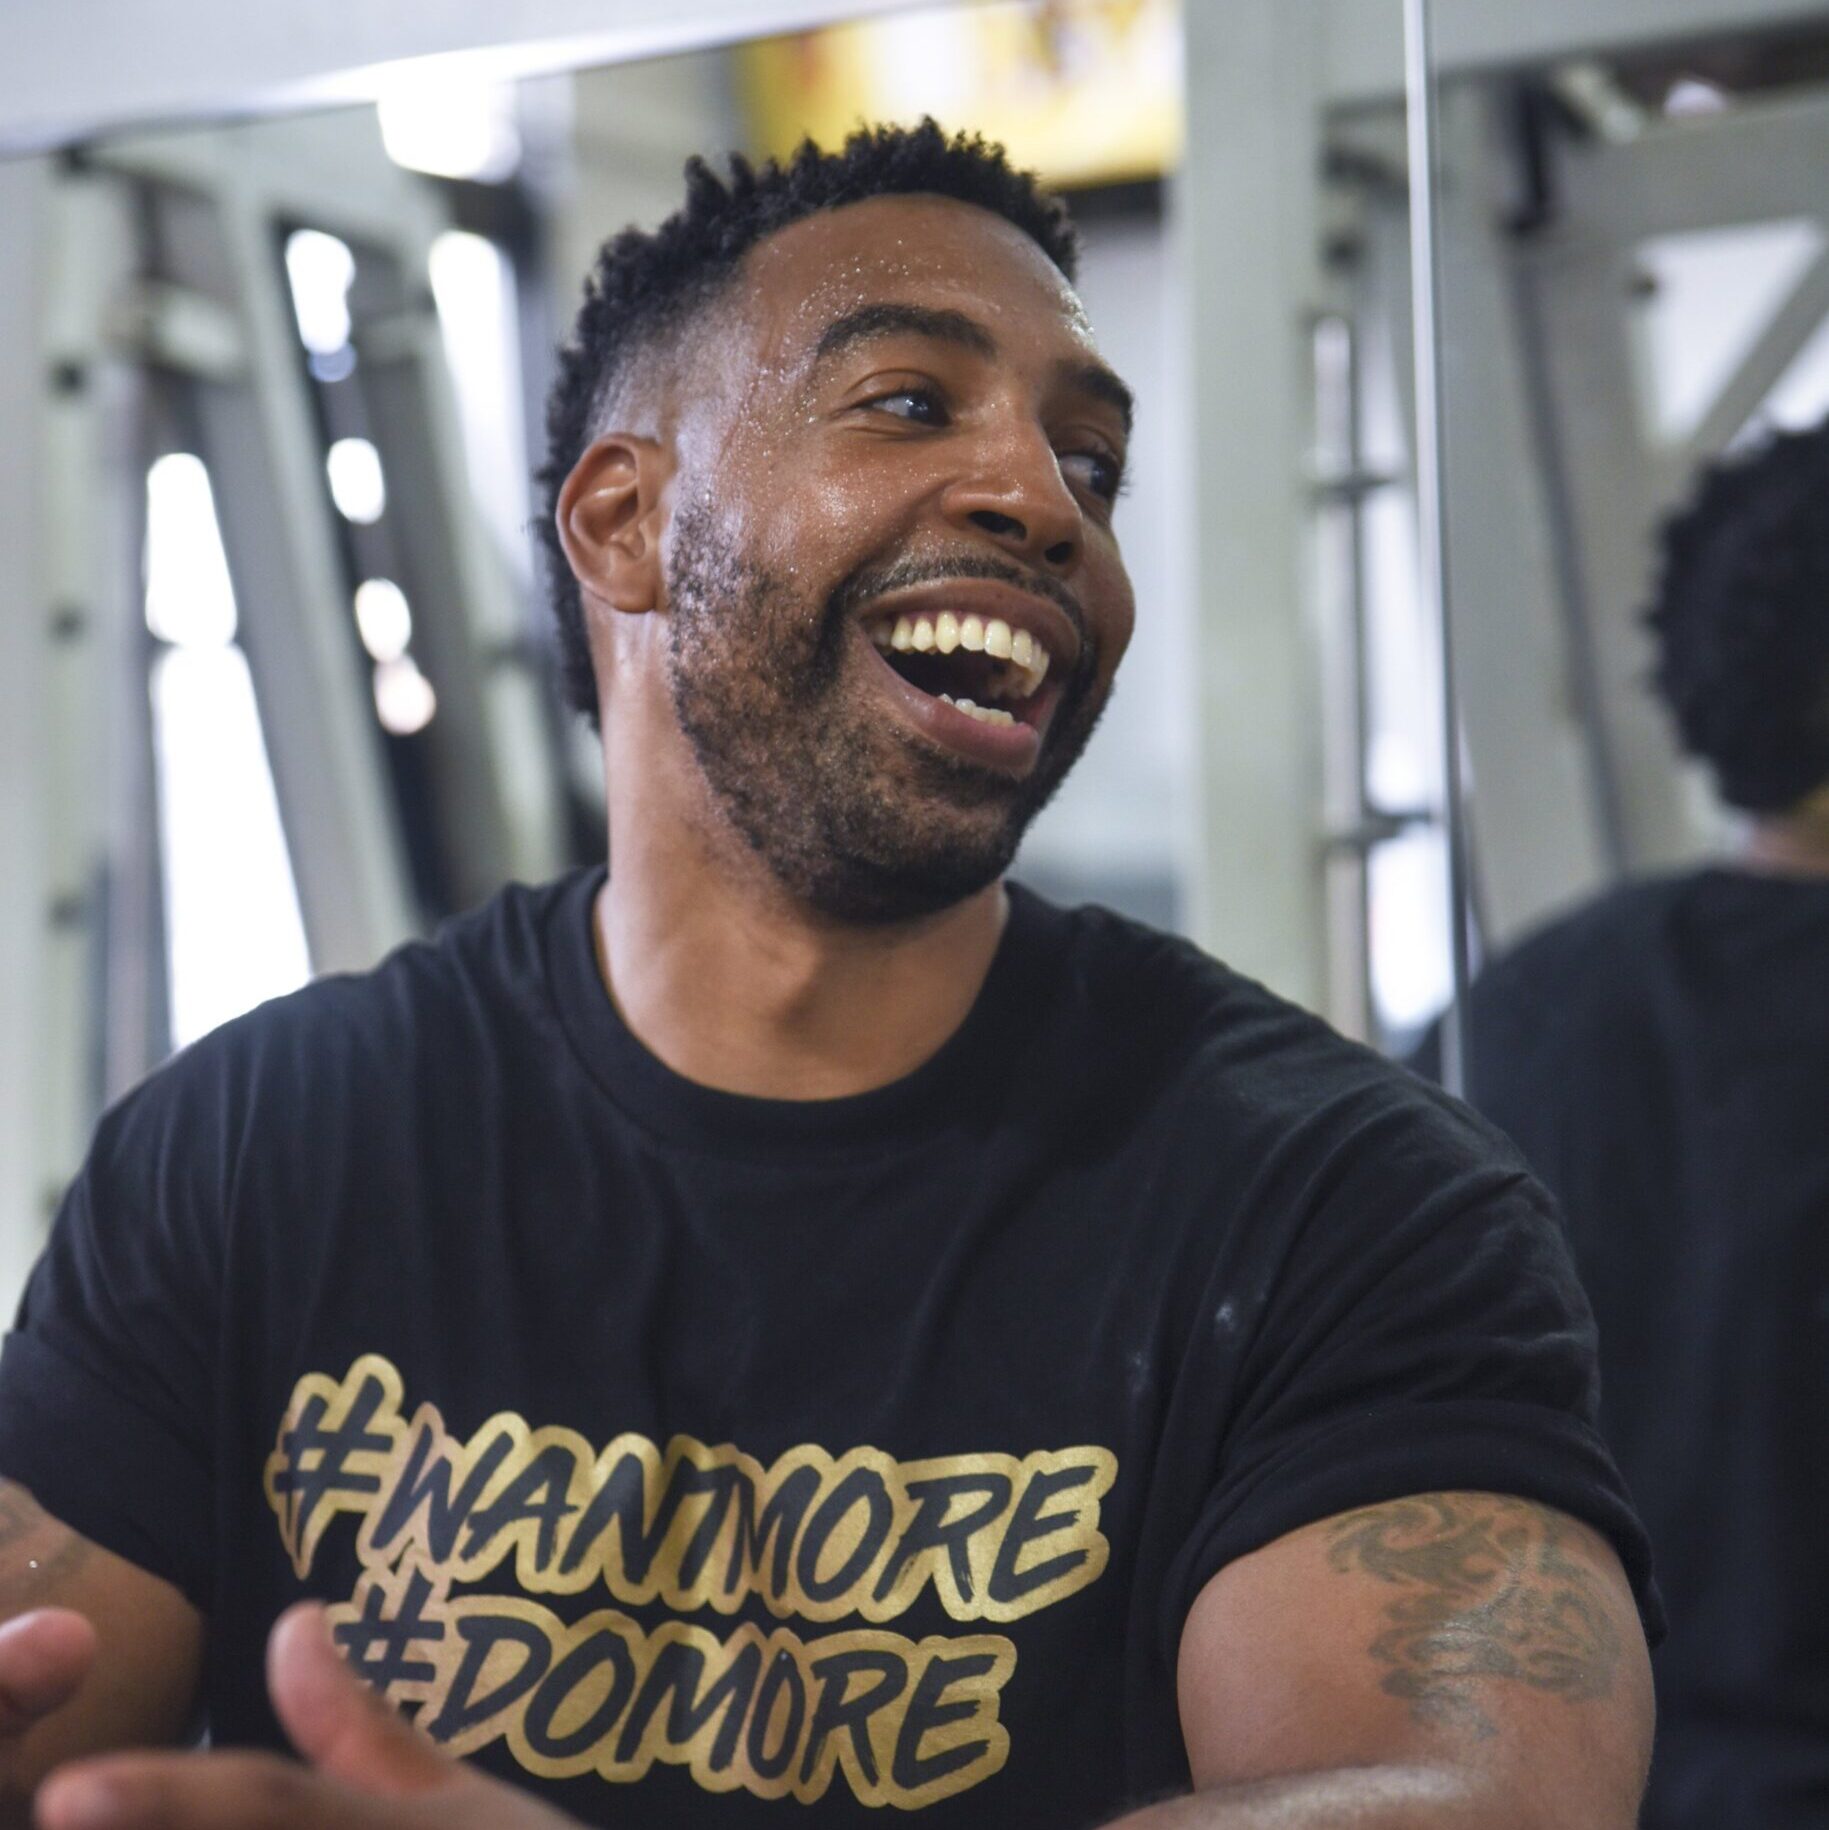 Daryl Gregory owns XII Rounds of Fitness Studio and provides personal 1:1 training, small group sessions, and online classes!